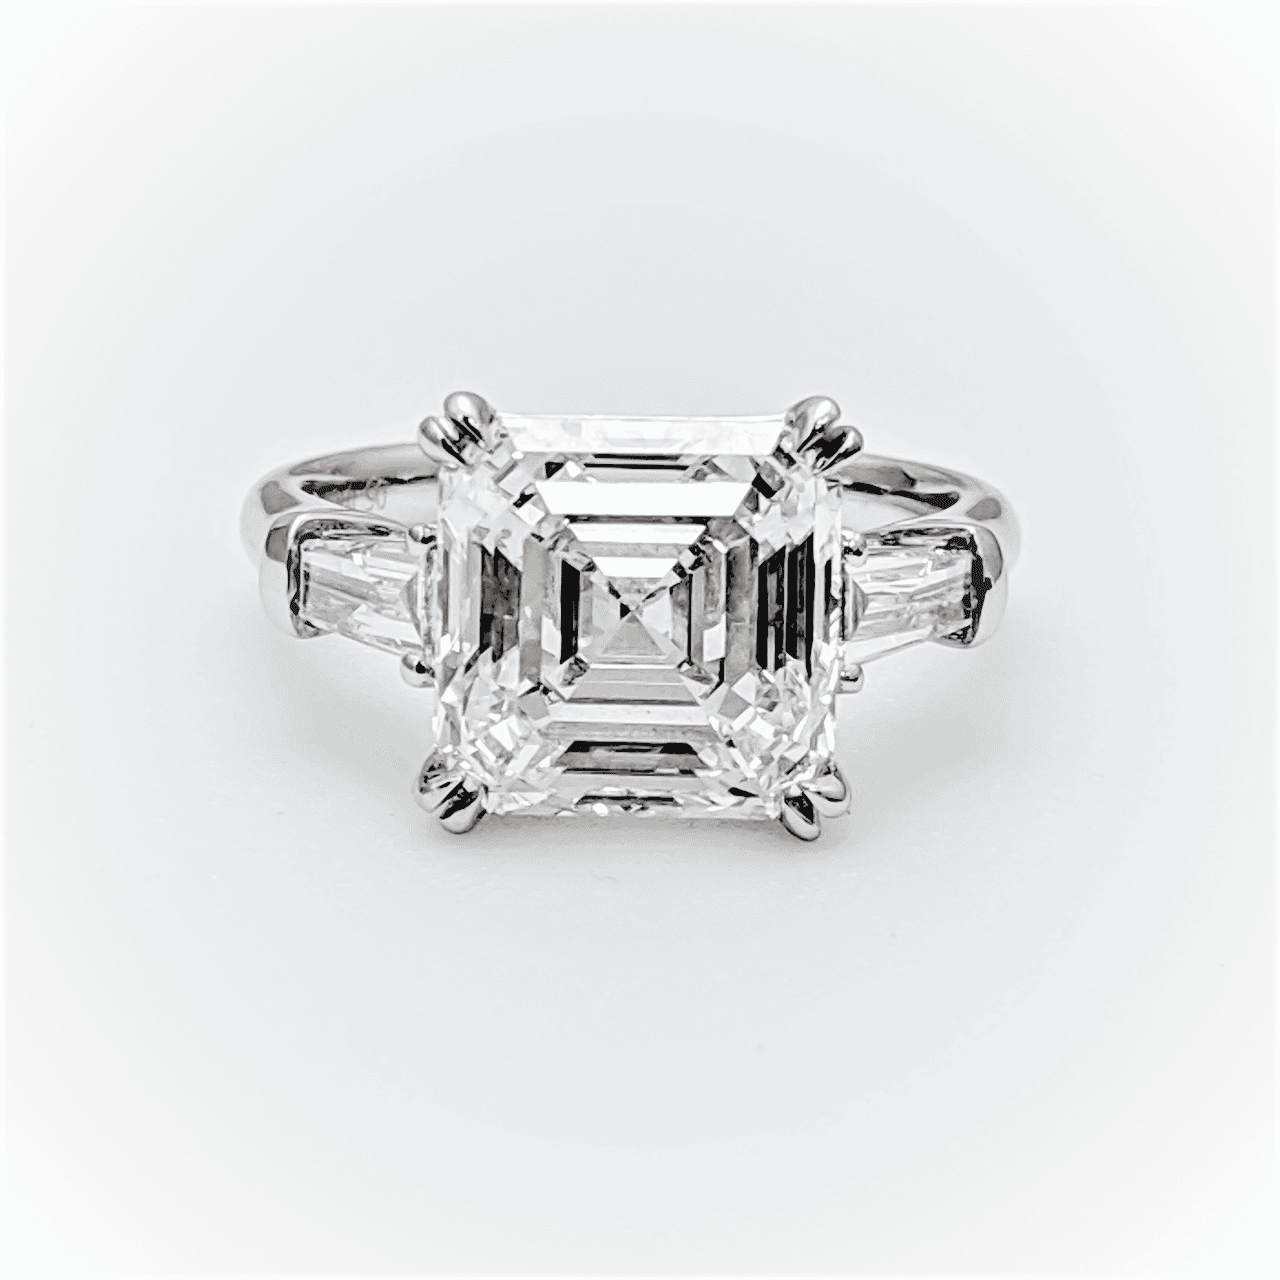 Kwiat | Engagement Ring with a Compass Set Asscher Cut Diamond and Baguette  Side Stones in Platinum - Kwiat